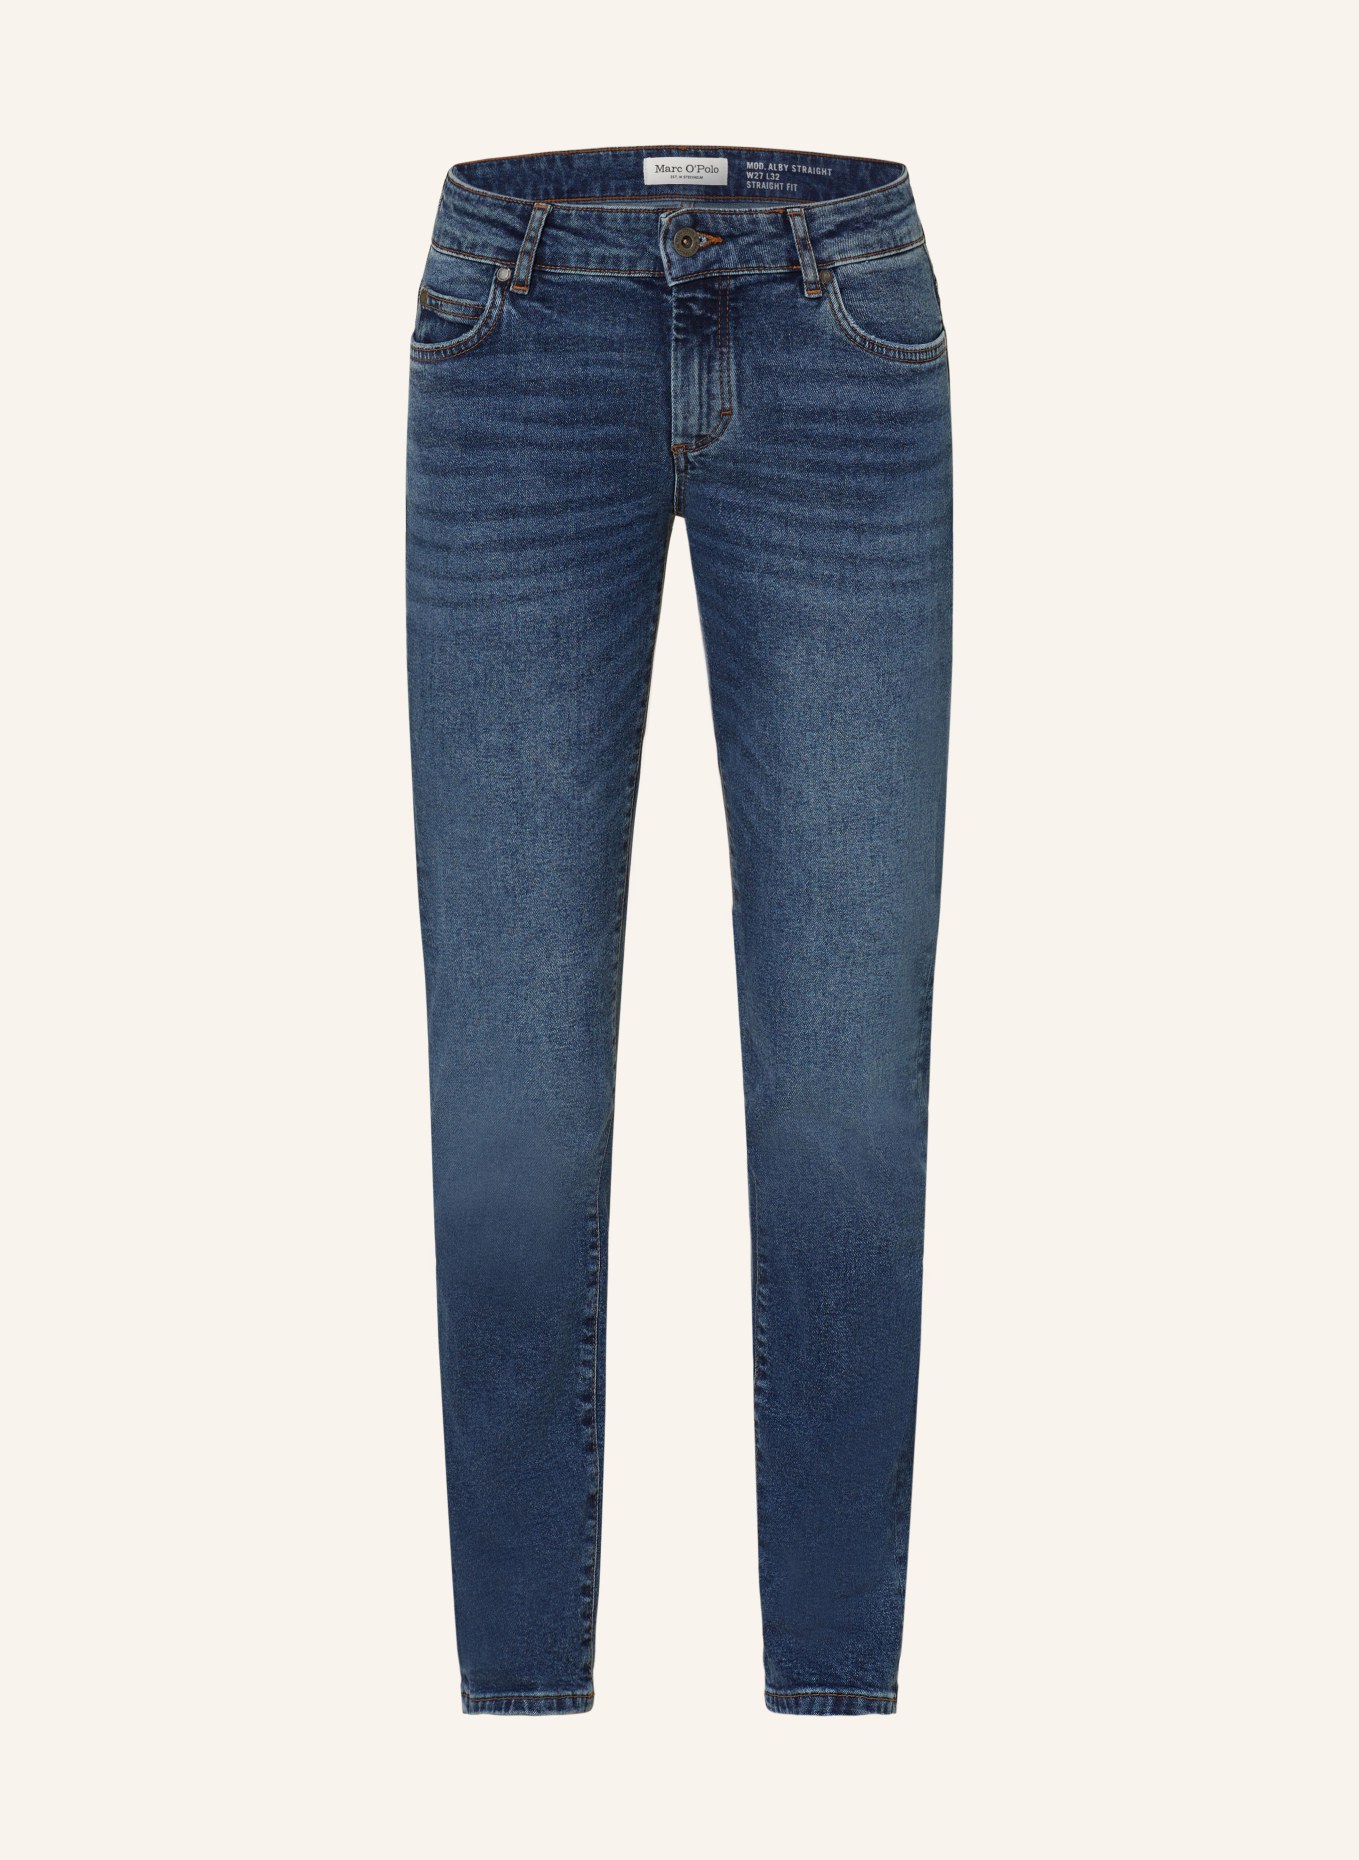 Marc O'Polo Straight jeans, Color: 075 Authentic mid blue wash (Image 1)